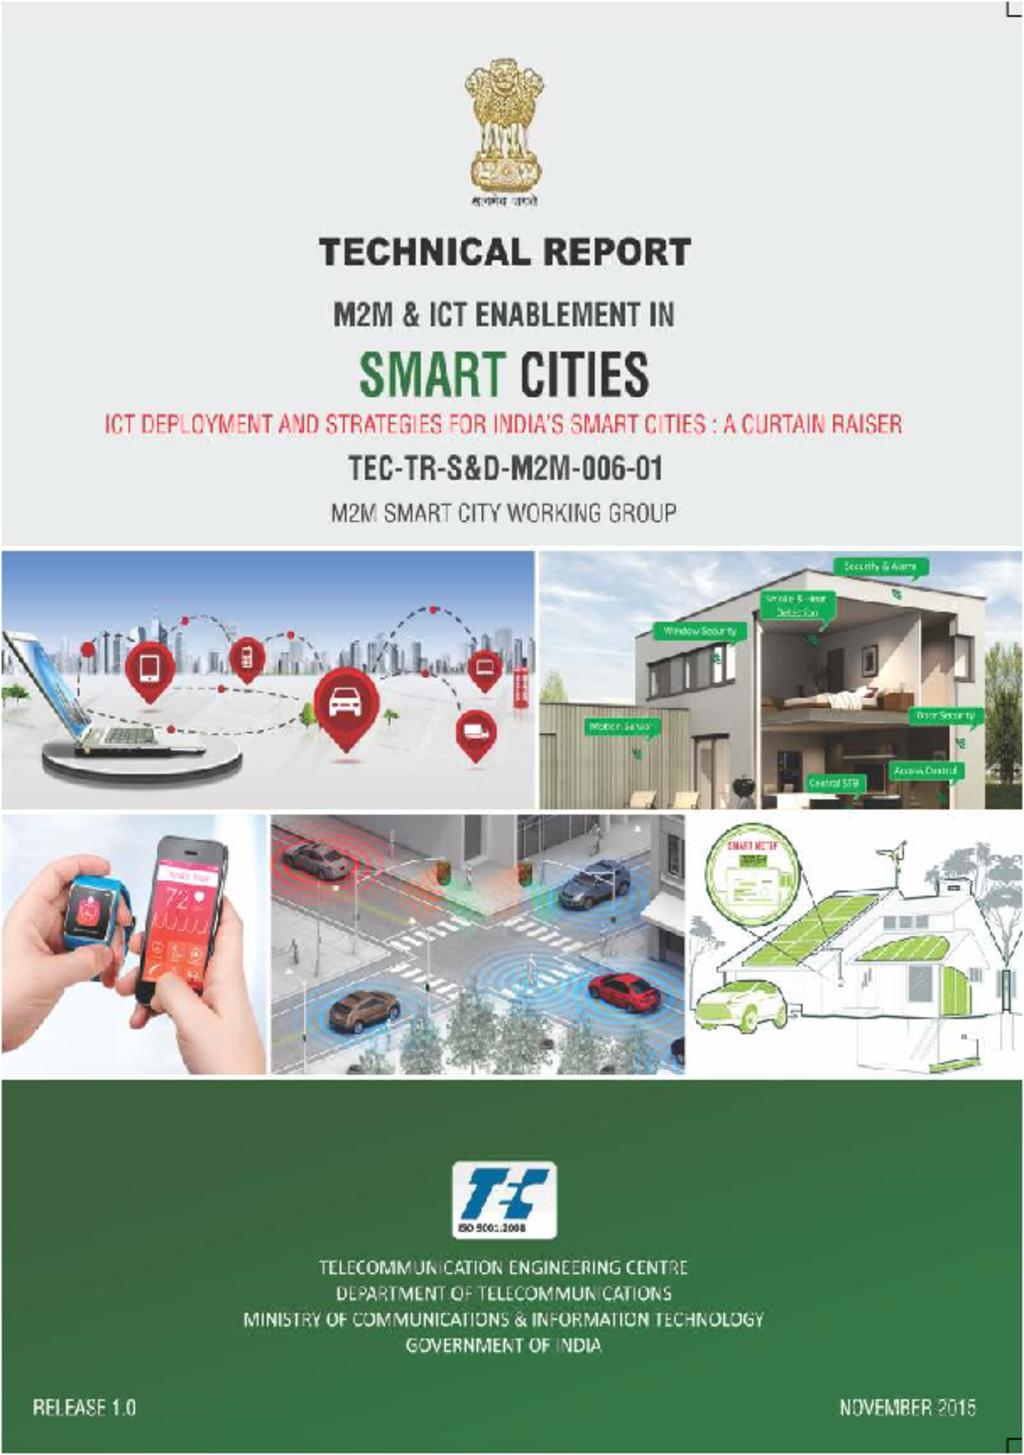 ICT deployment and strategies for smart cities